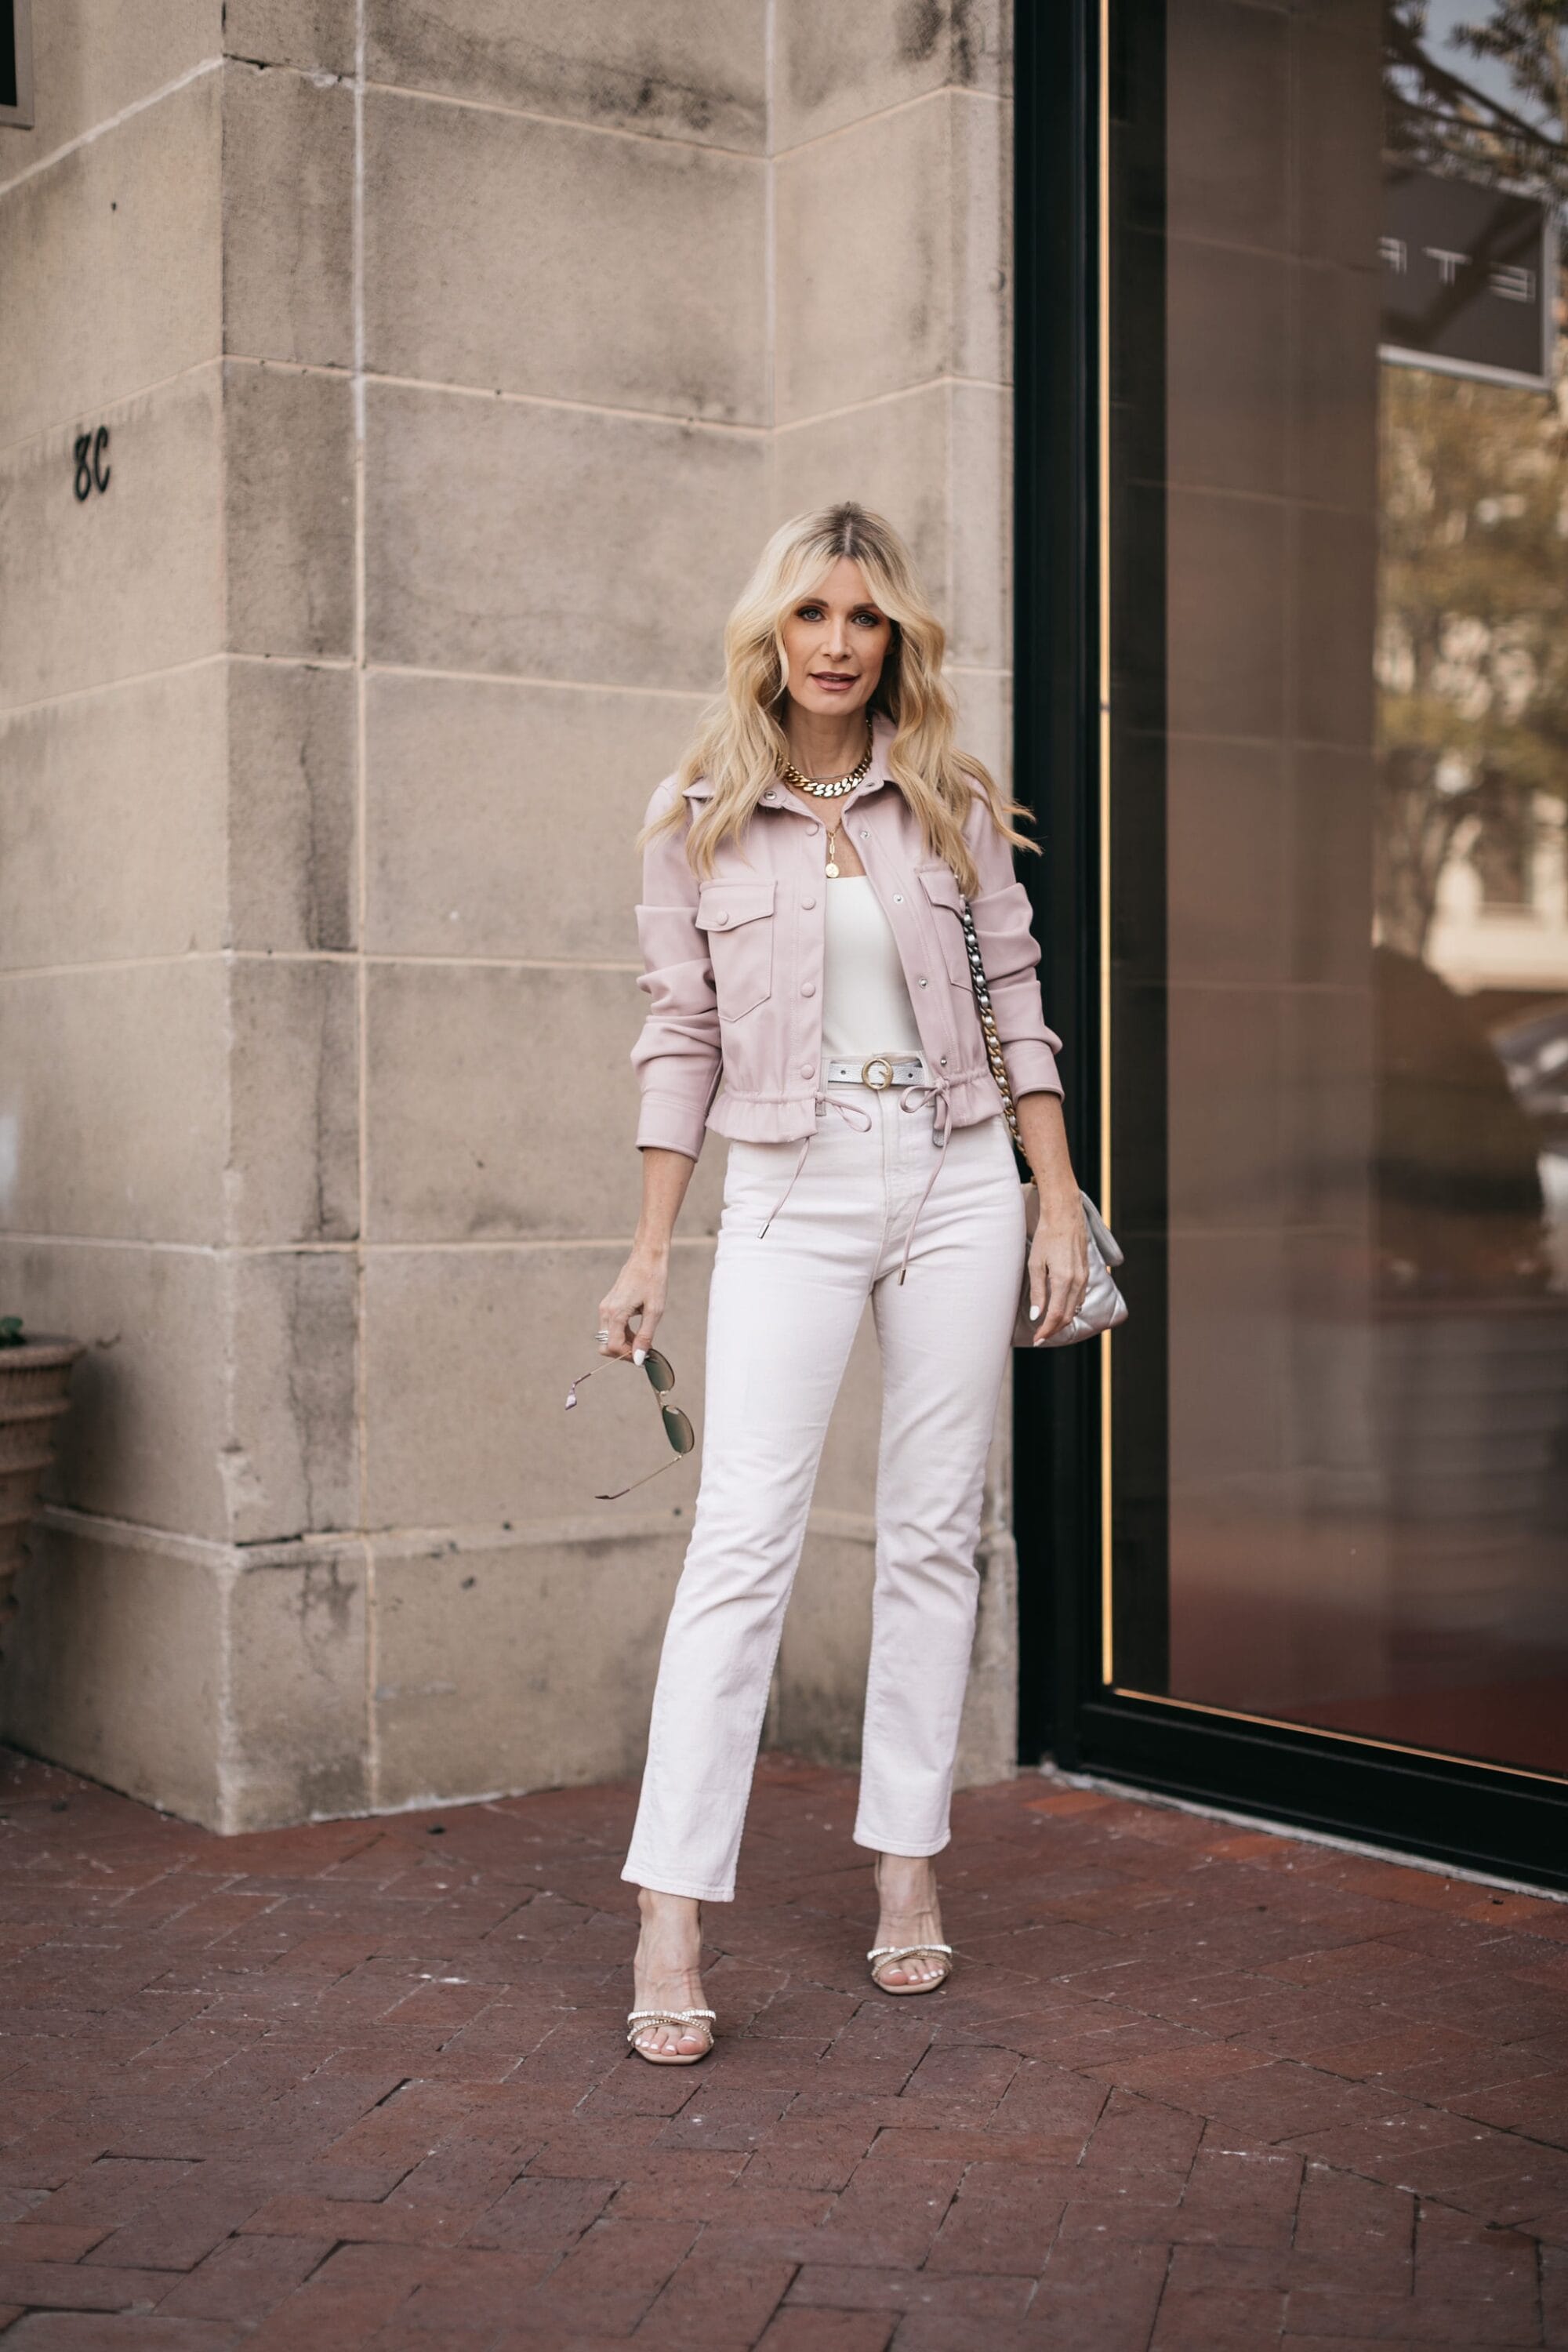 Dallas fashion blogger over 40 wearing all white with lavender jacket